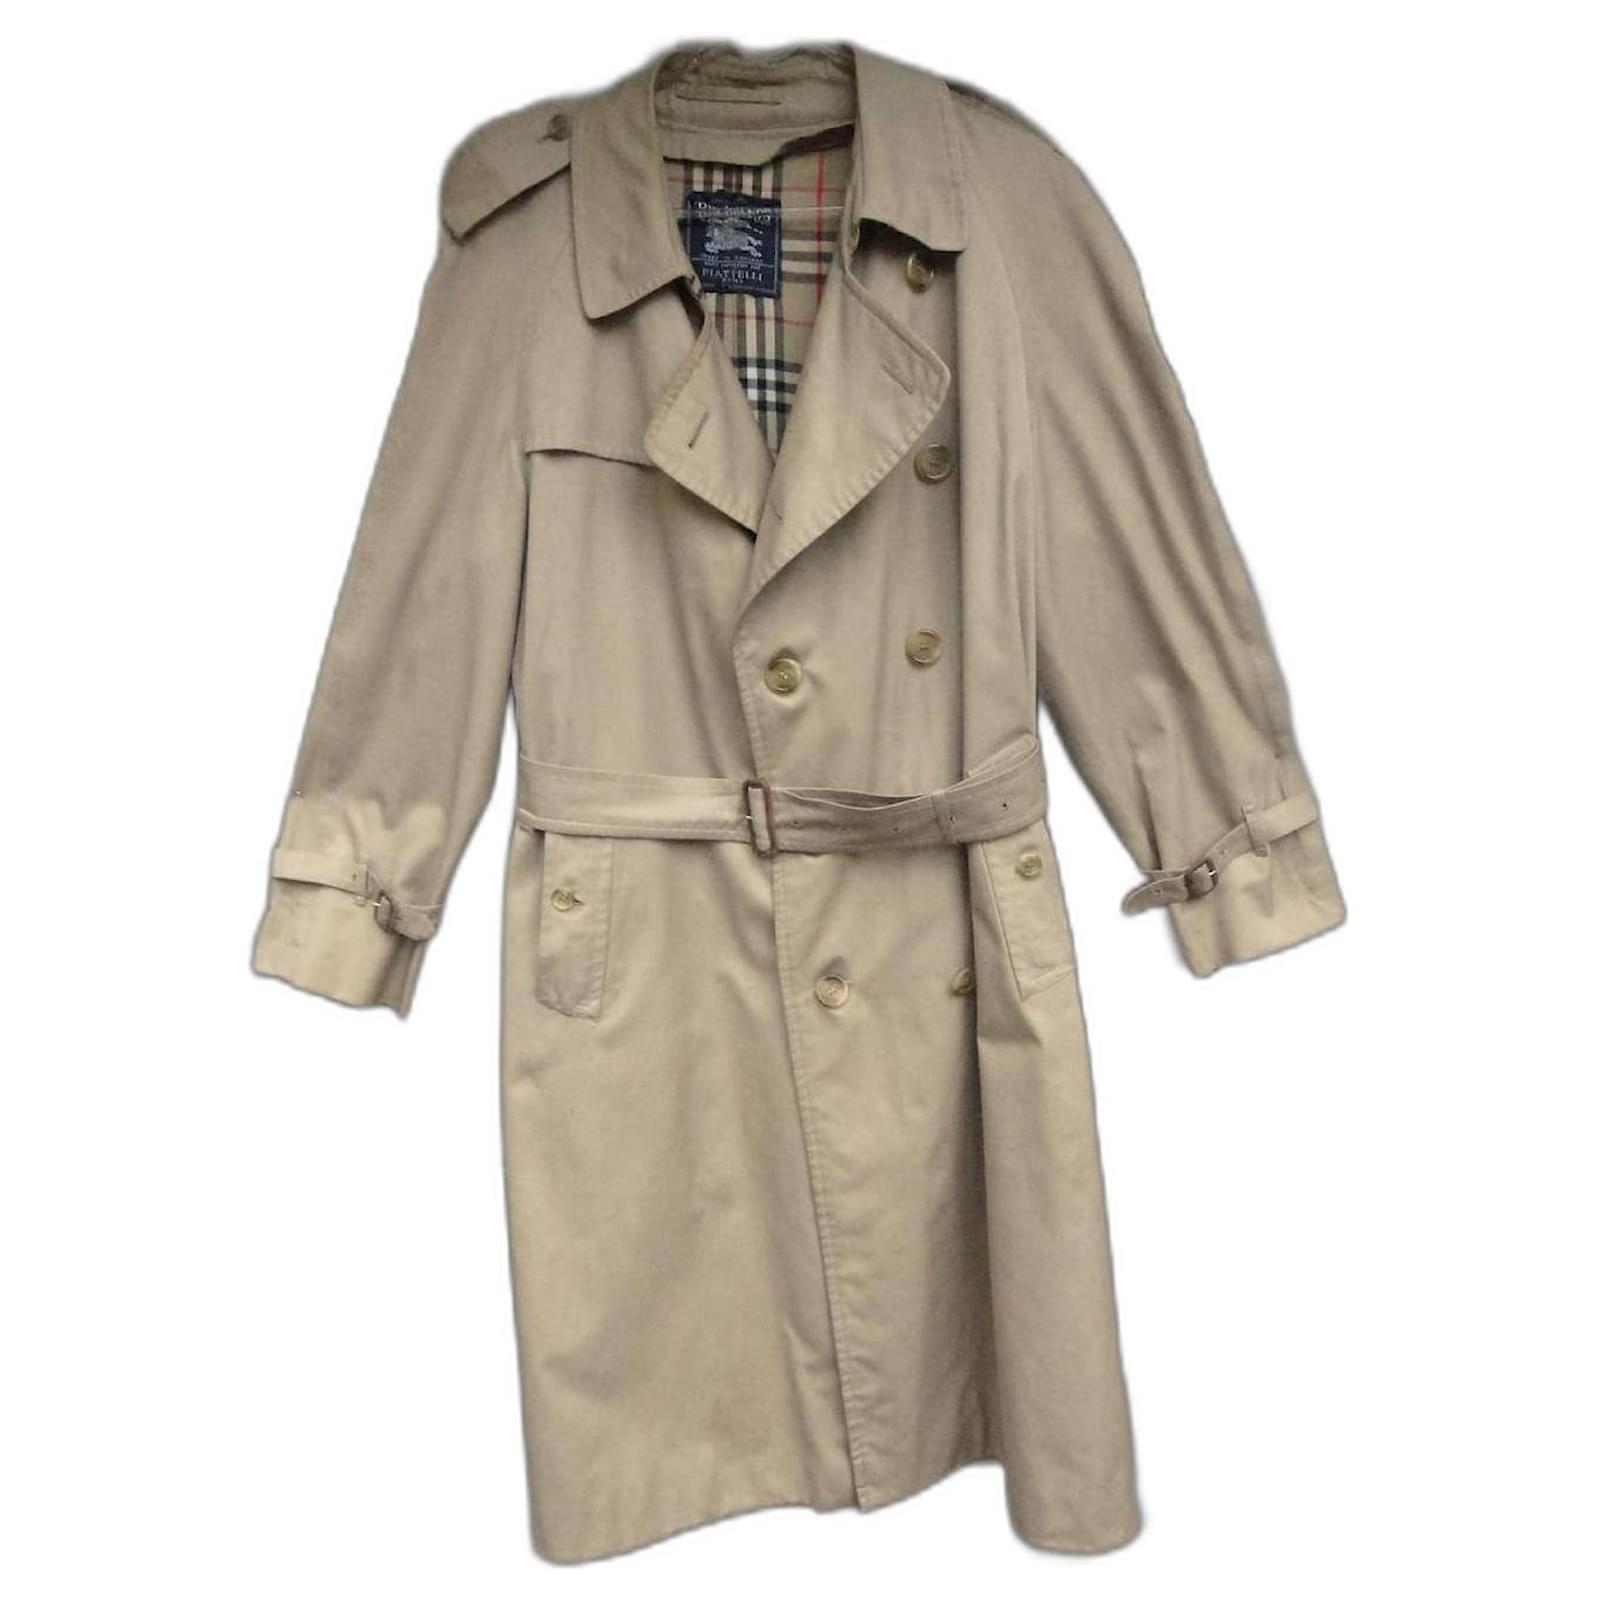 VINTAGE BURBERRY TRENCH COAT WITH REMOVABLE WOOL LINING